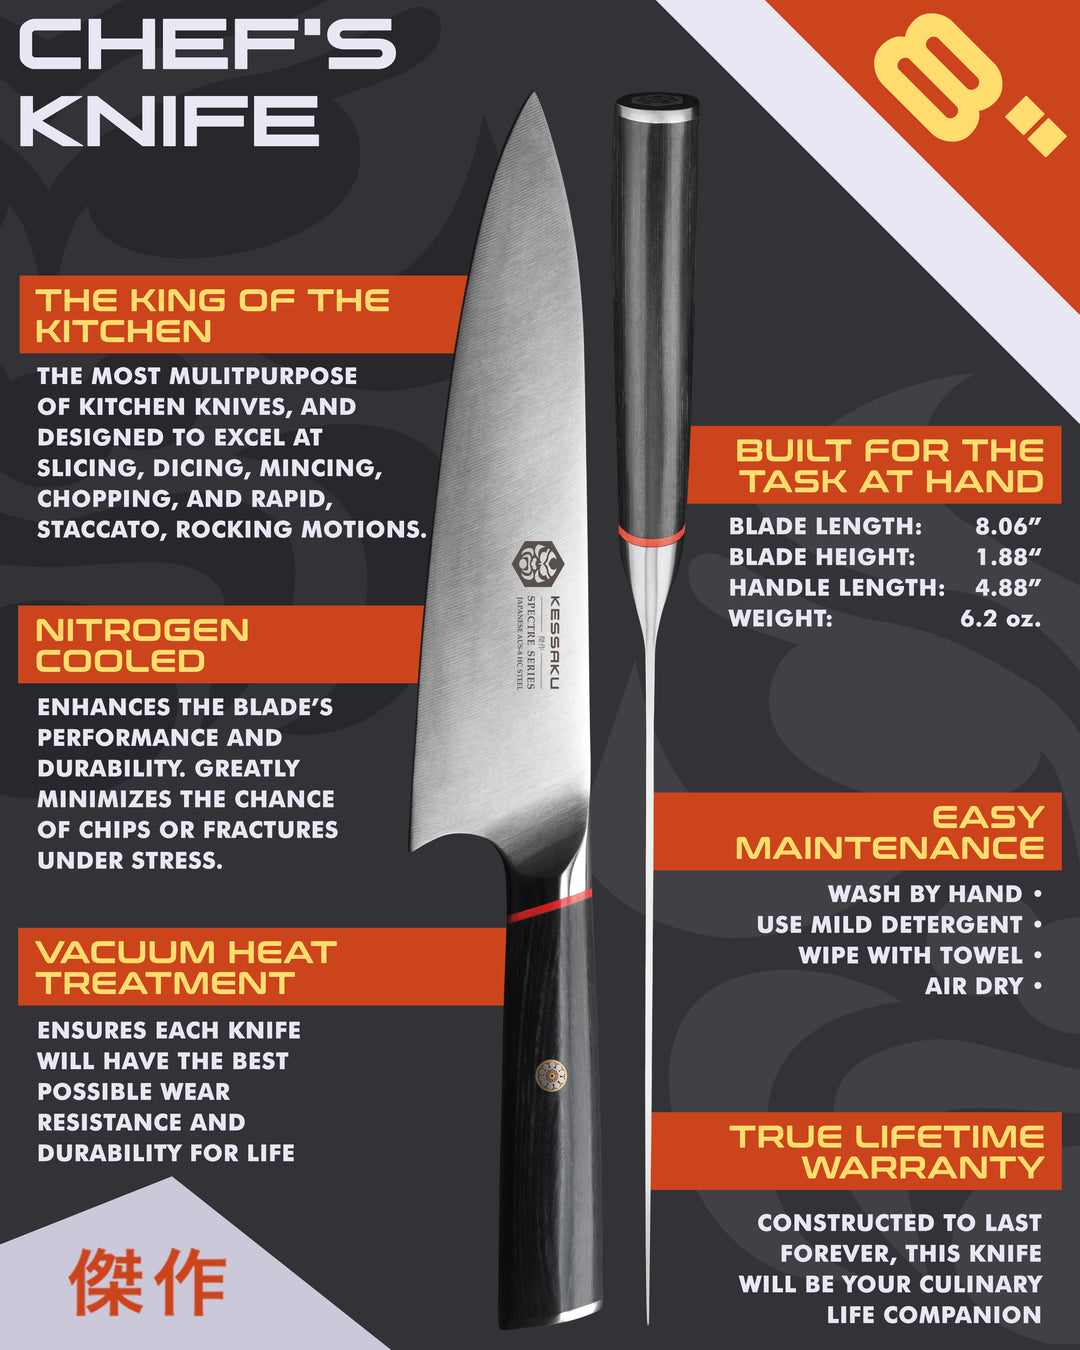 Kessaku Spectre Chef's Knife uses, dimensions, maintenance, warranty info, and additional blade treatments